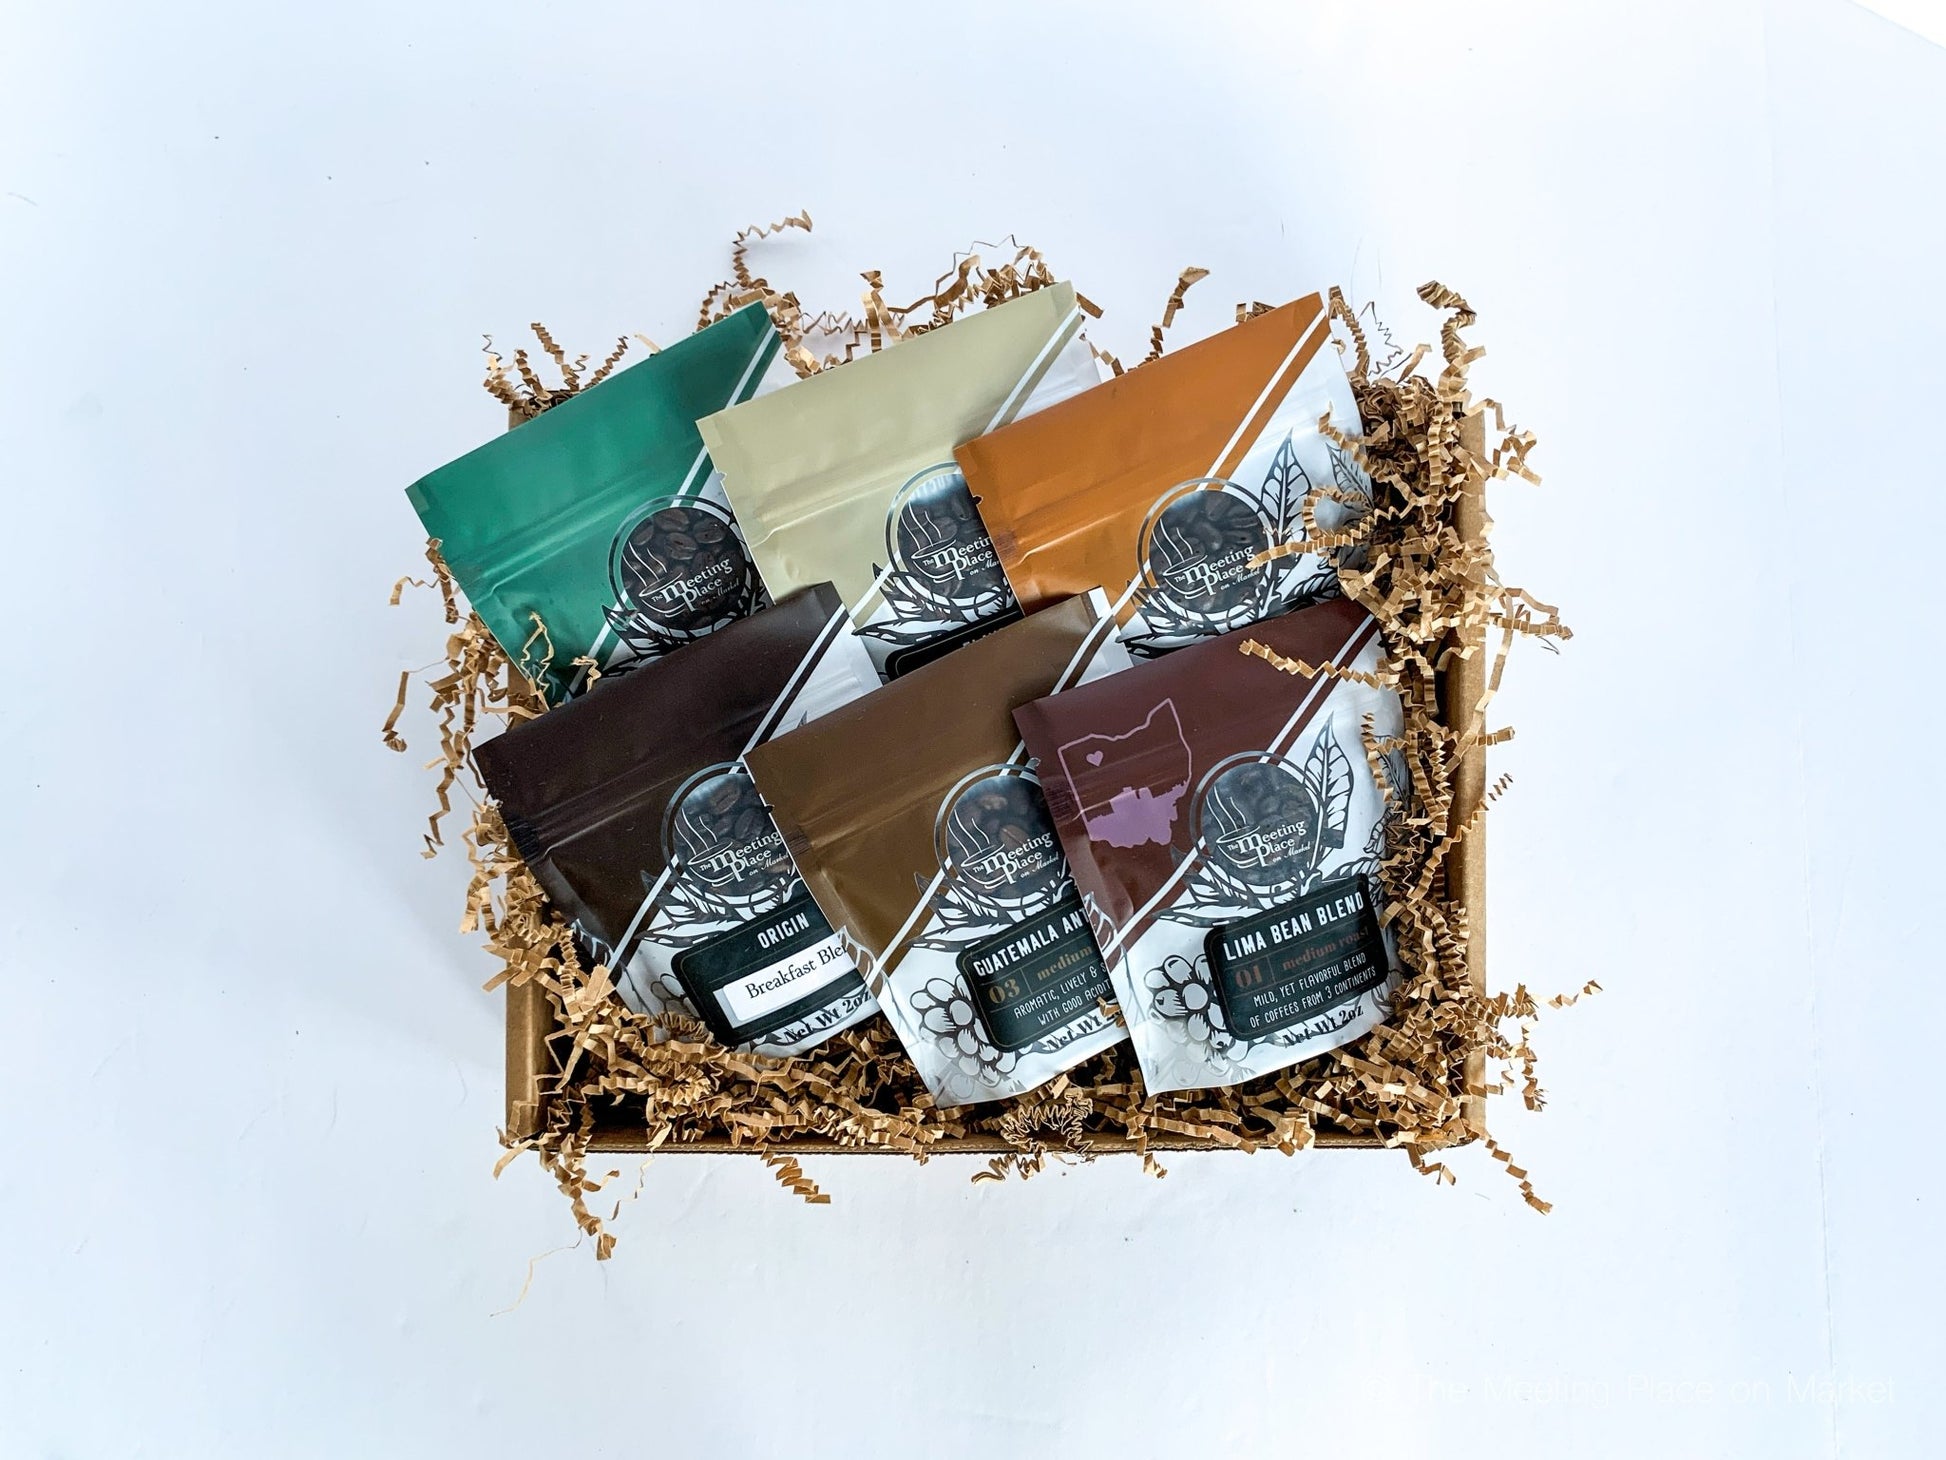 Flavored Coffee Lover's Sampler, Set of 6 in Gift Box with Ribbon Valentine's Day Gift Basket - The Meeting Place on Market